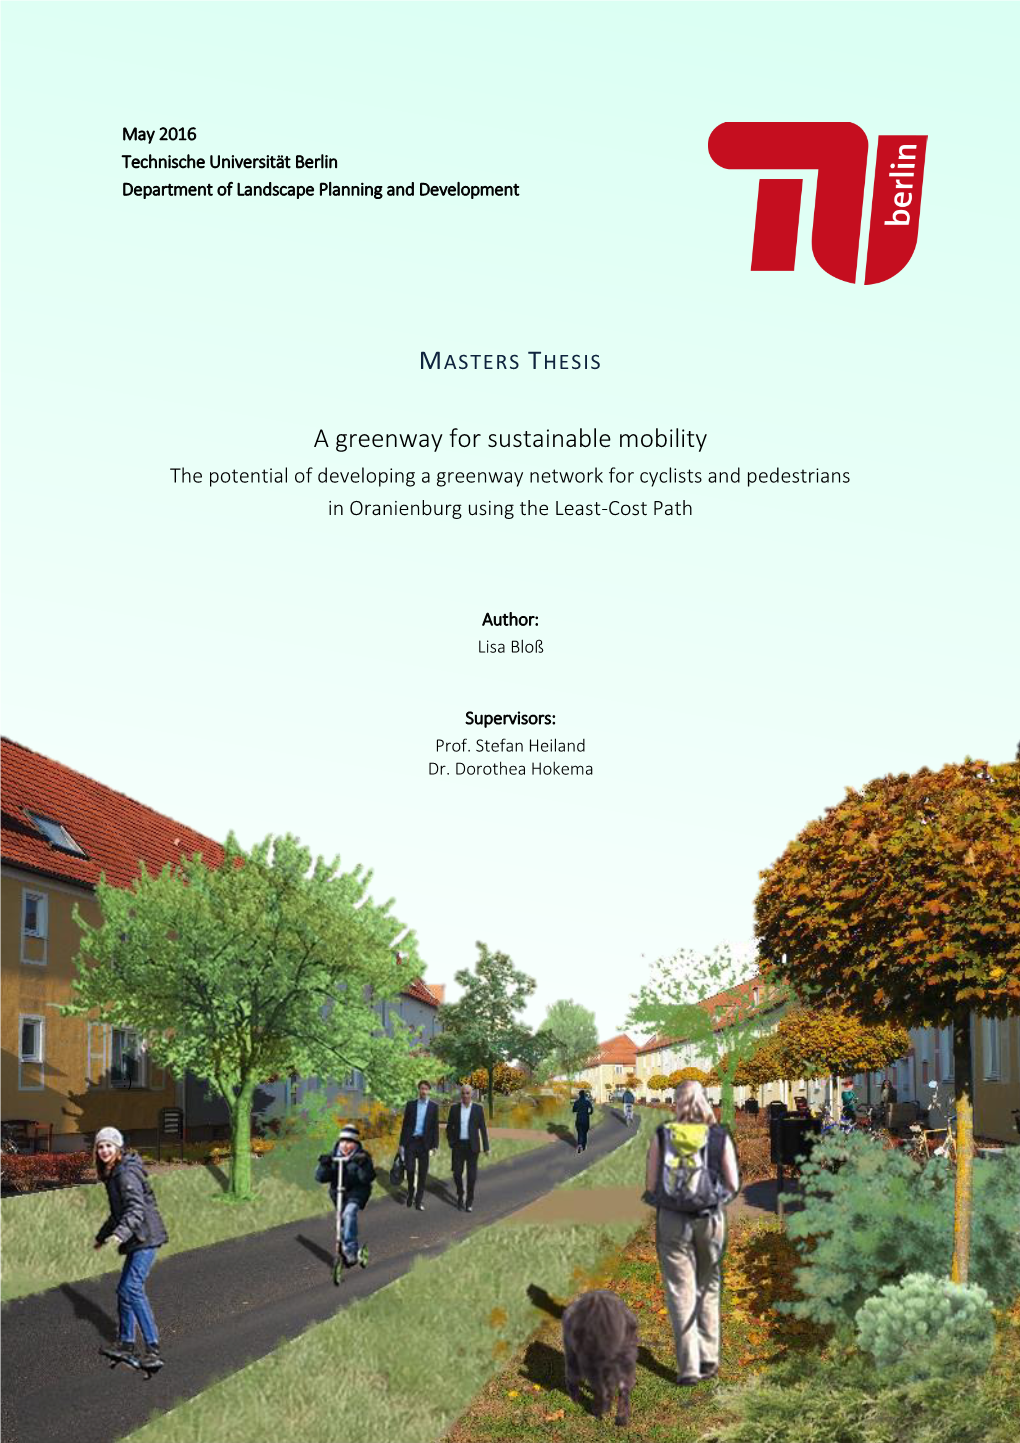 A Greenway for Sustainable Mobility the Potential of Developing a Greenway Network for Cyclists and Pedestrians in Oranienburg Using the Least-Cost Path